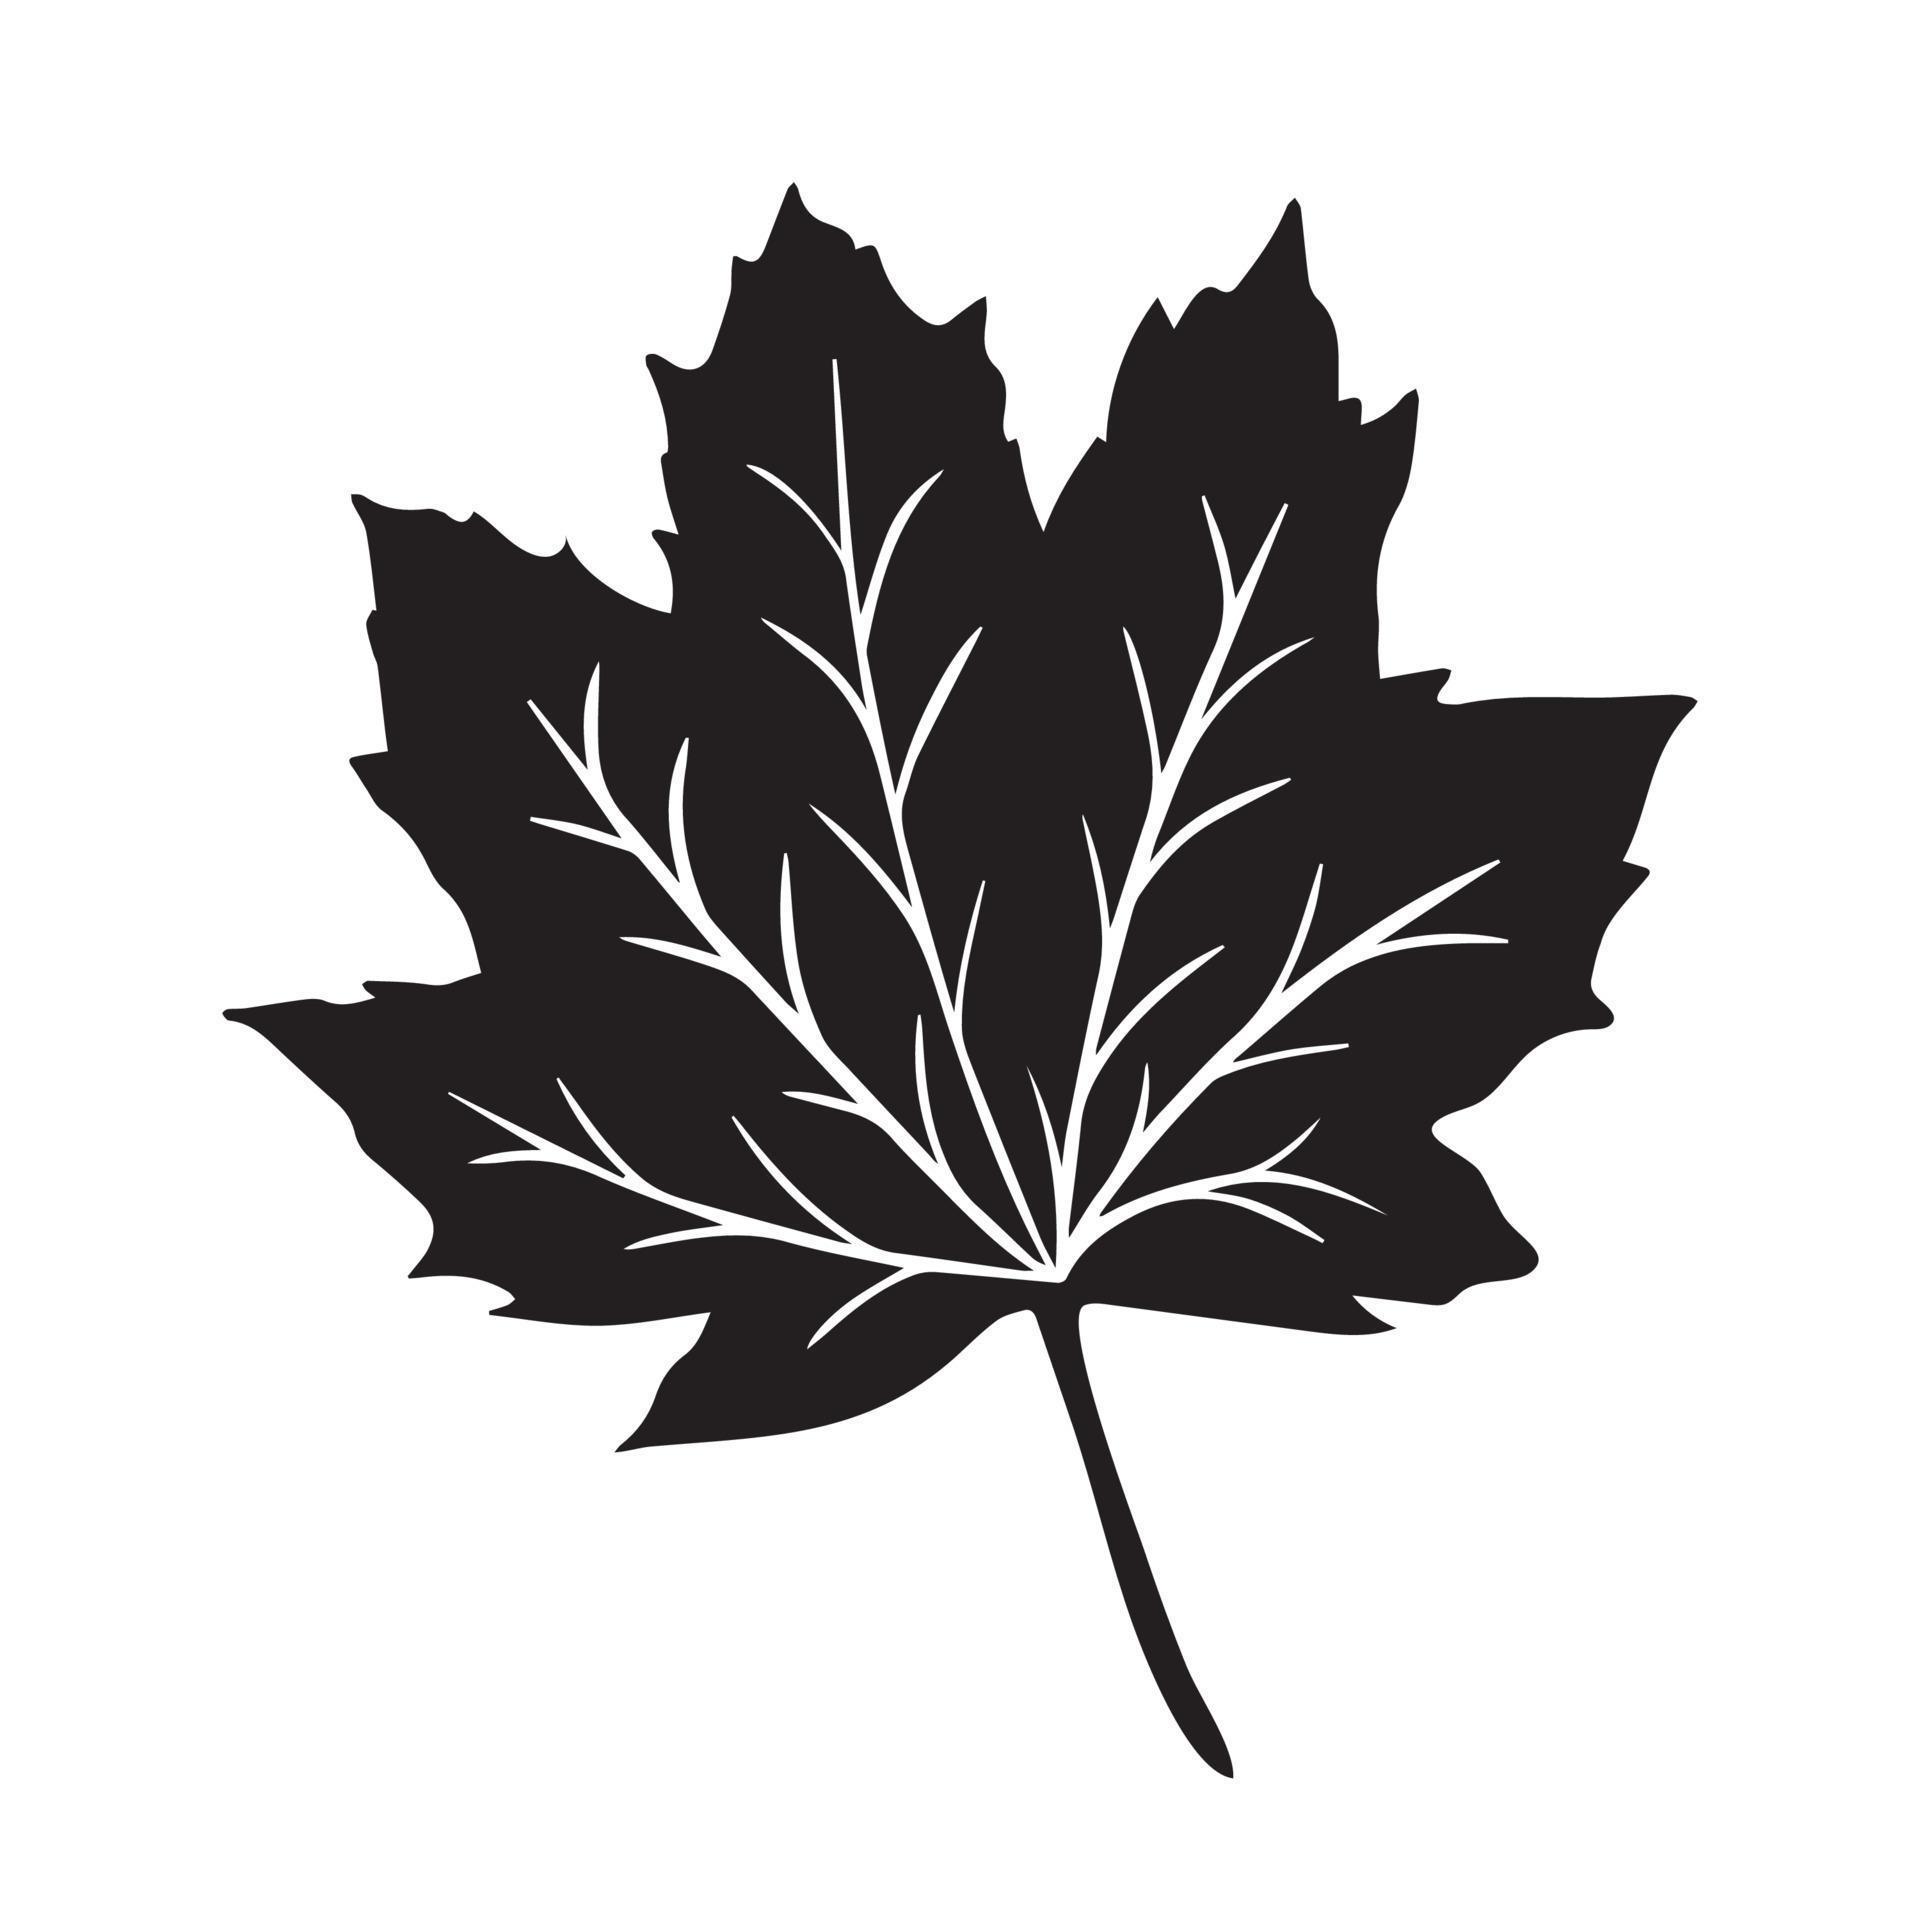 Maple leaf black vector icon silhouette isolated on white background ...